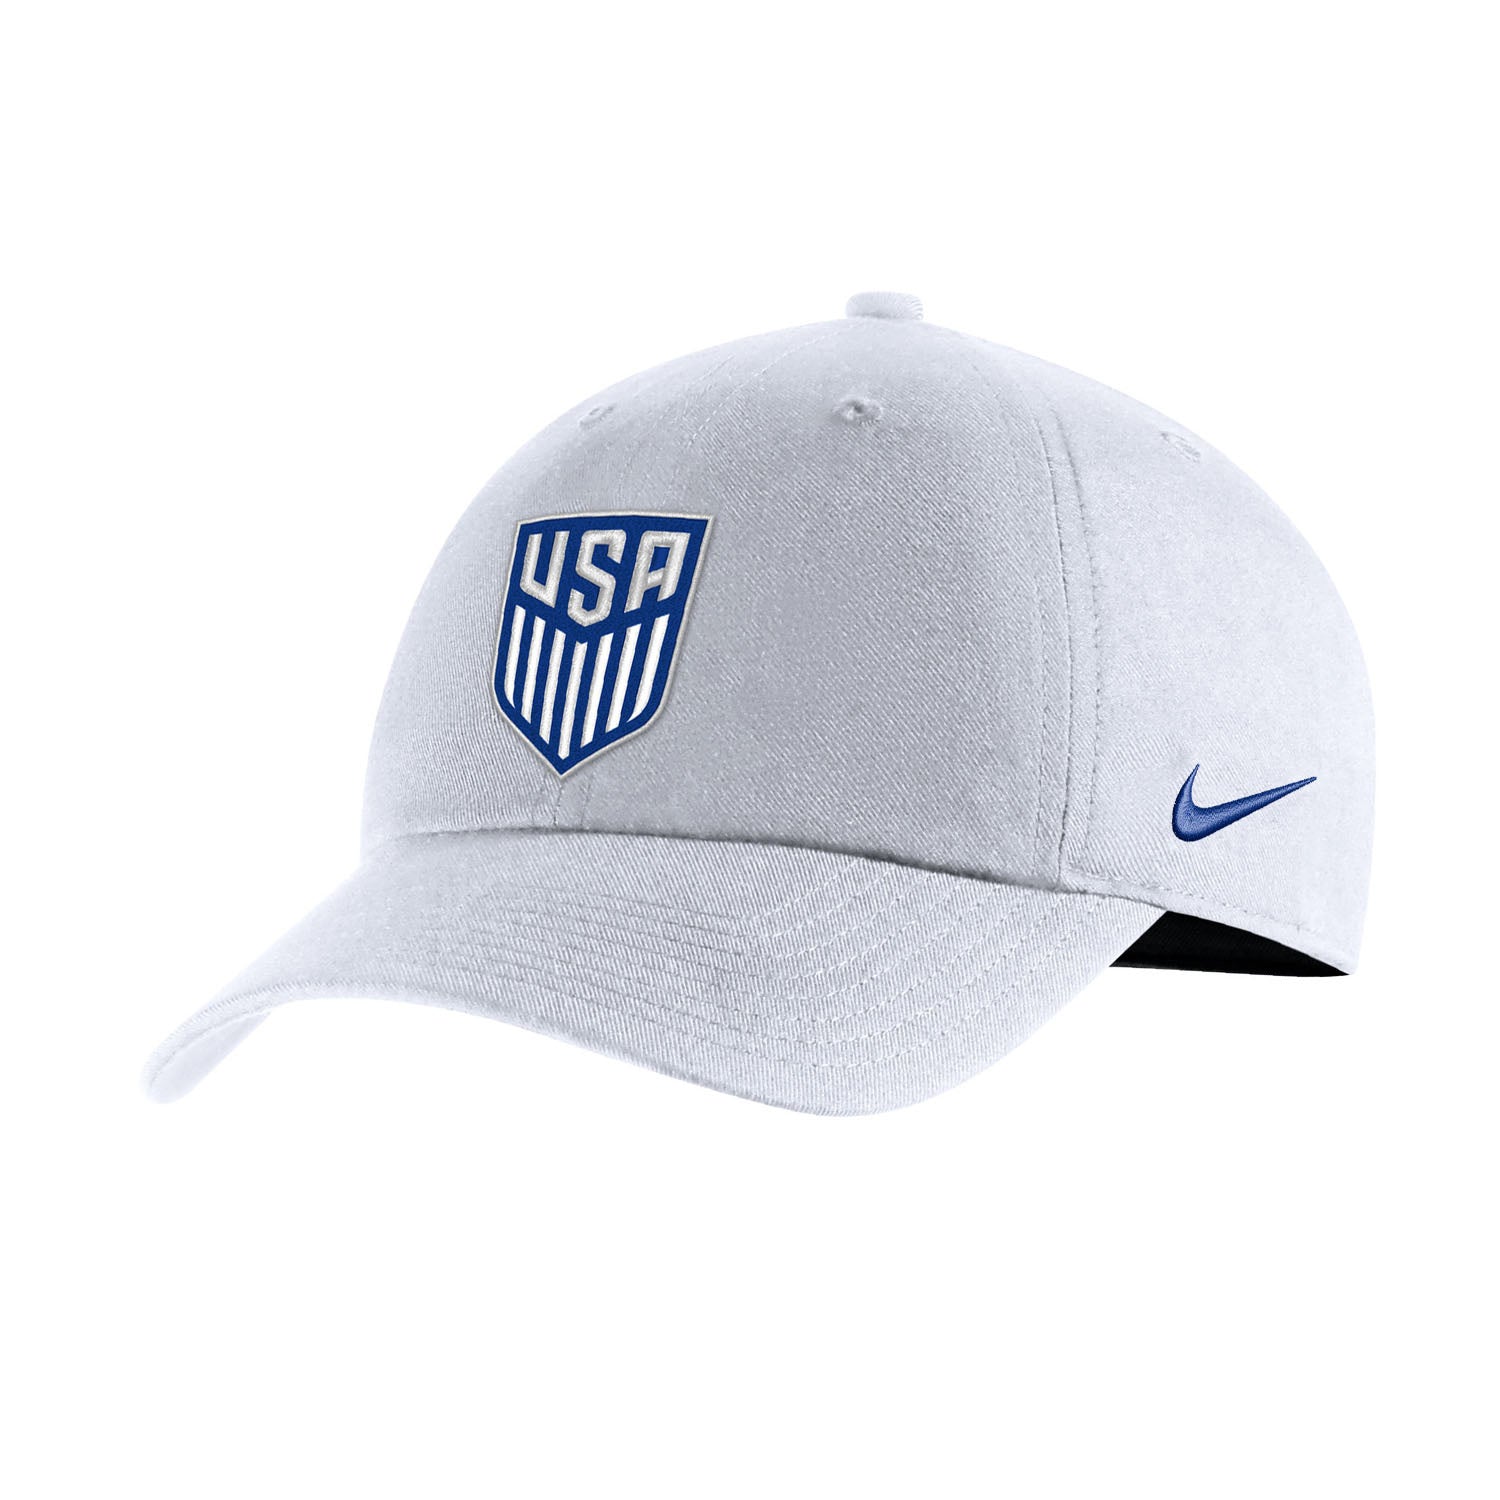 Men's Nike USA White Hat - Official U.S. Store